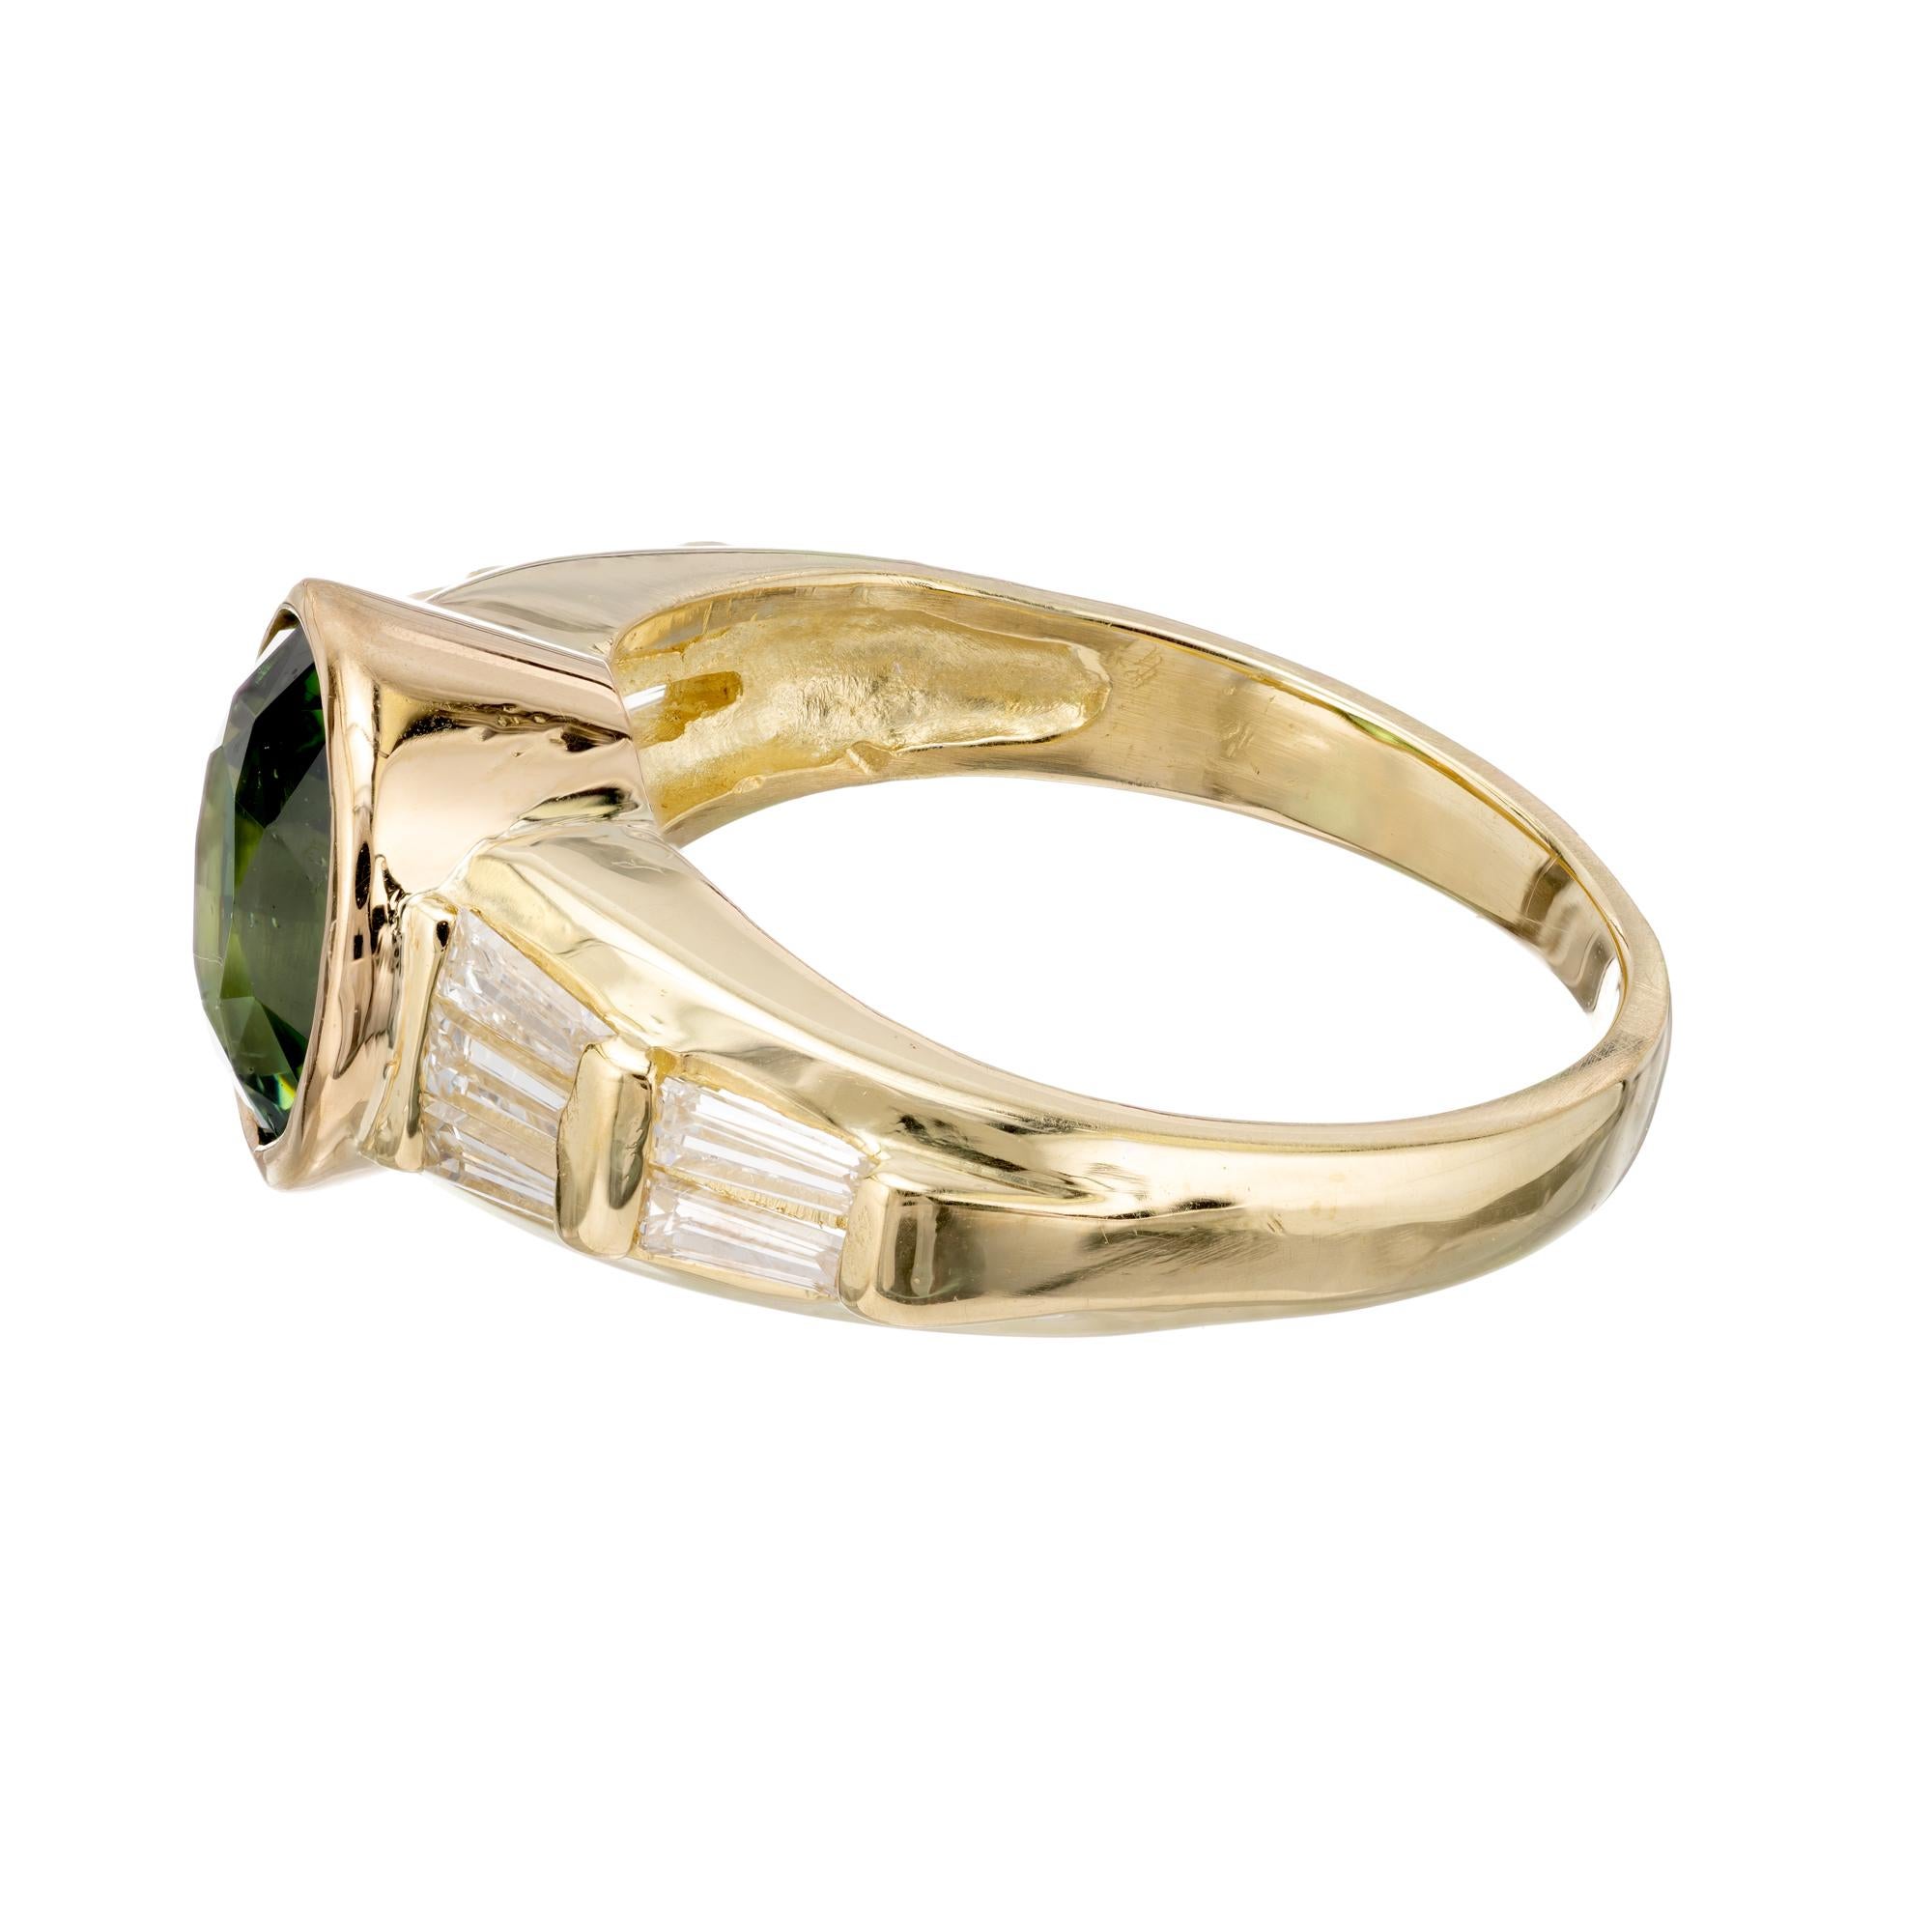 Peter Suchy GIA Certified 3.44 Carat Green Zircon Diamond Gold Engagement Ring In New Condition For Sale In Stamford, CT